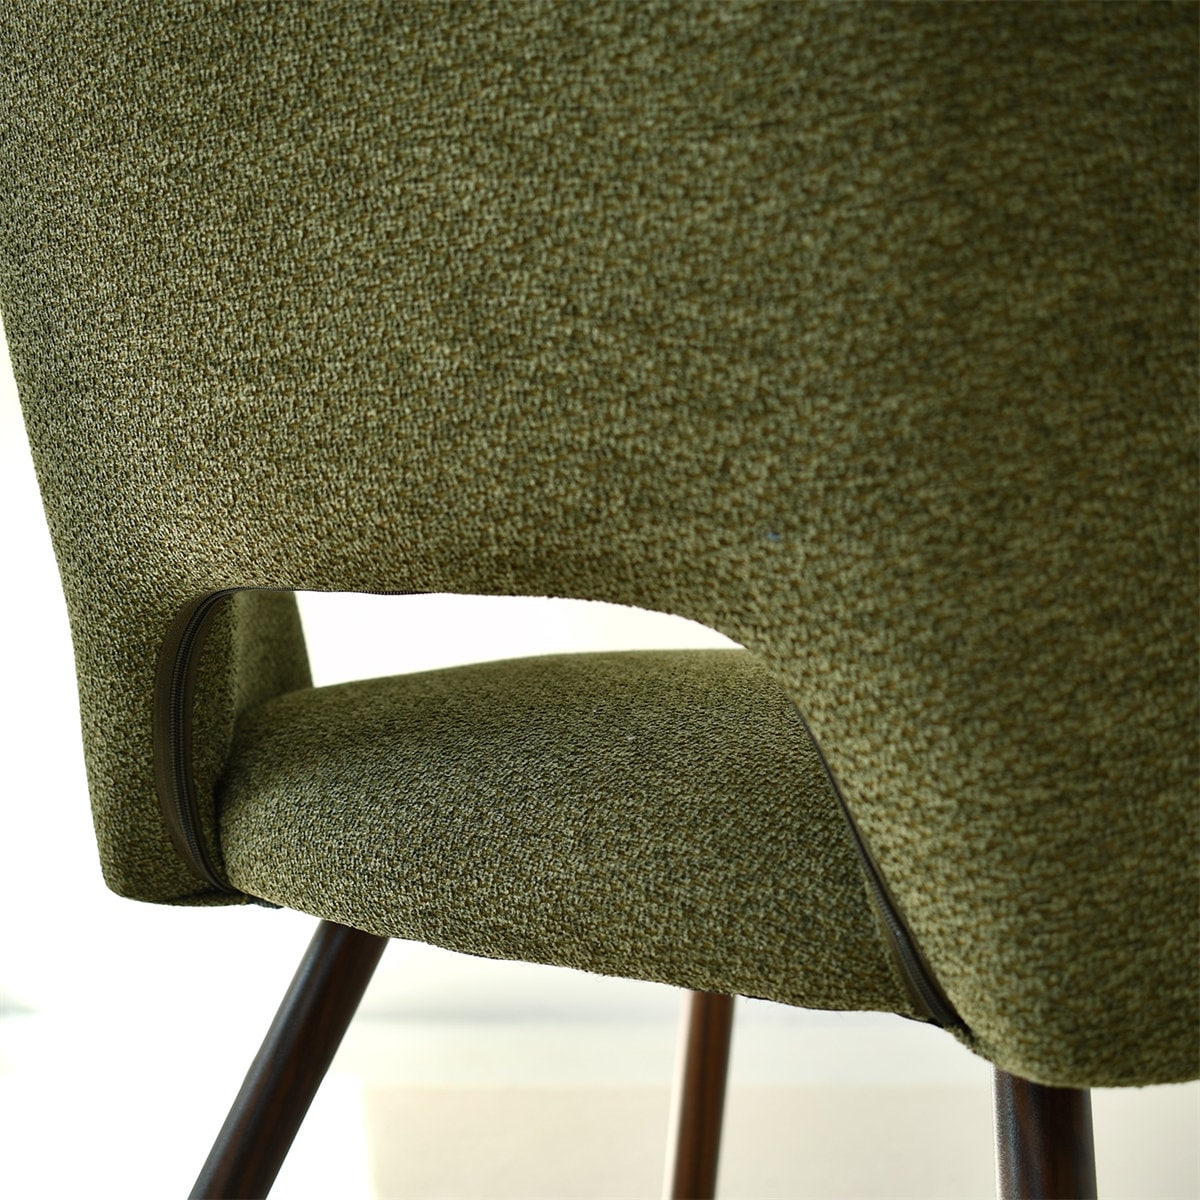 Elevens Upholstered Modern Cutout Back Dining Chair with Walnut